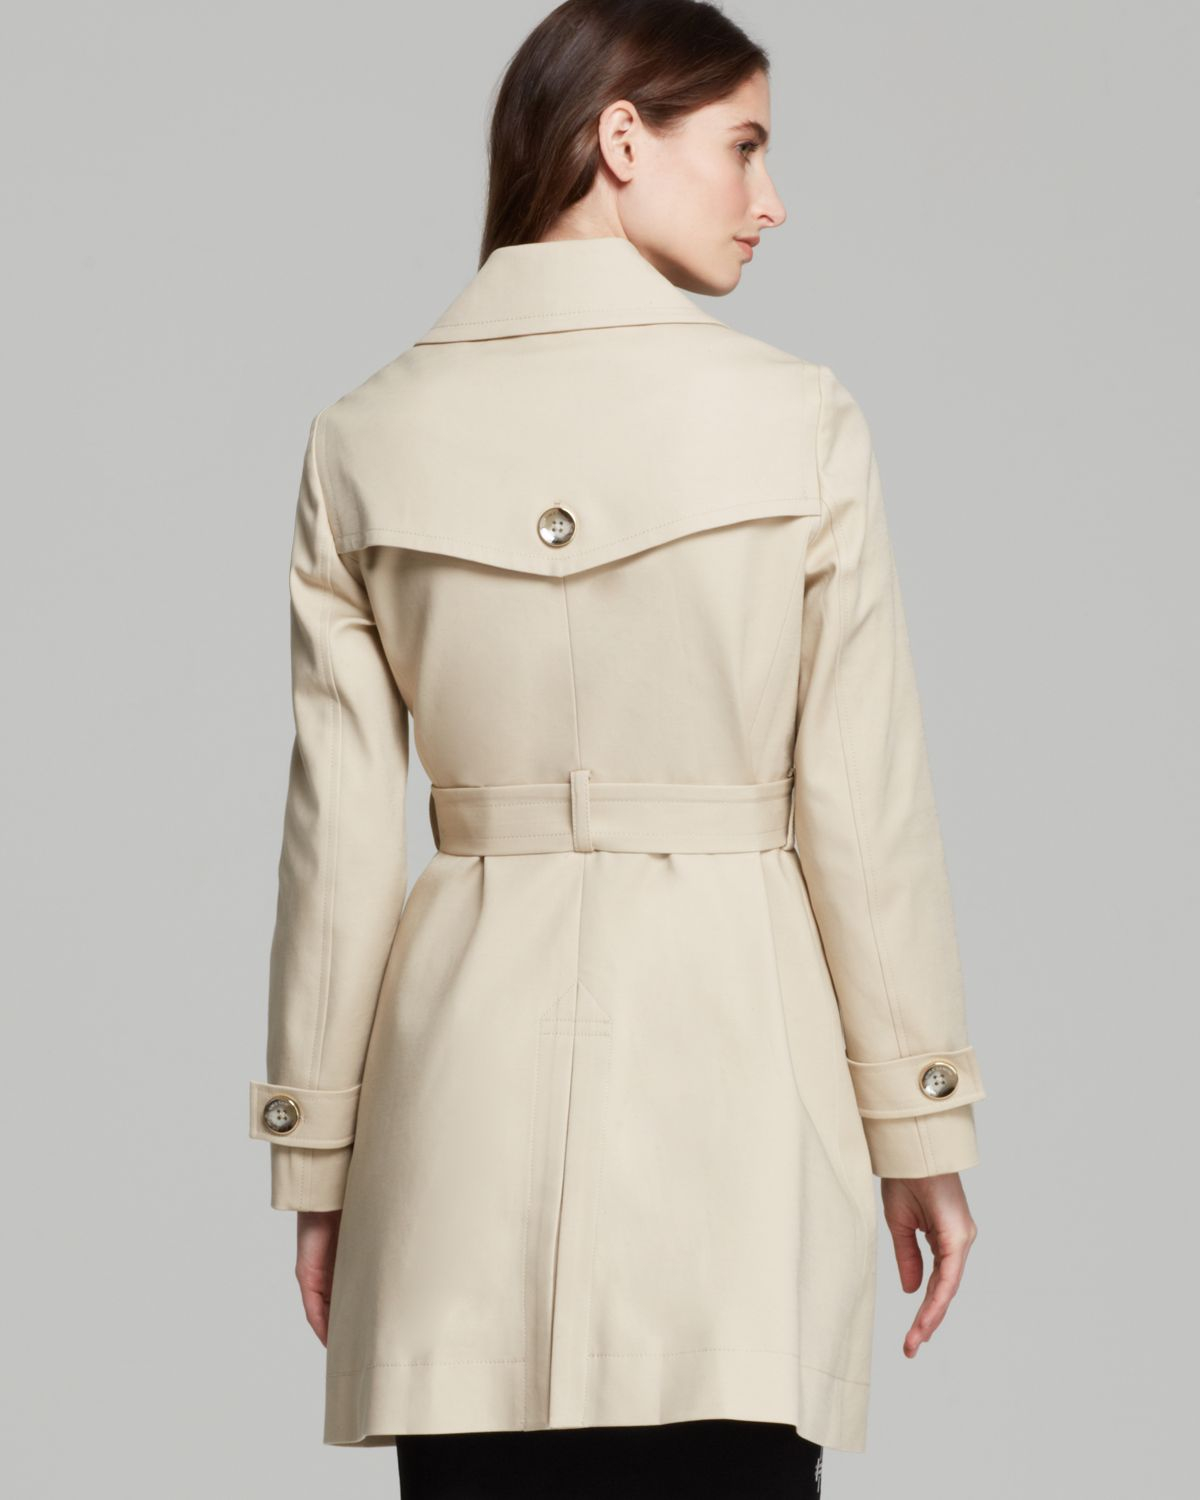 Lyst - Vince Camuto Tie Waist Trench Coat in Natural